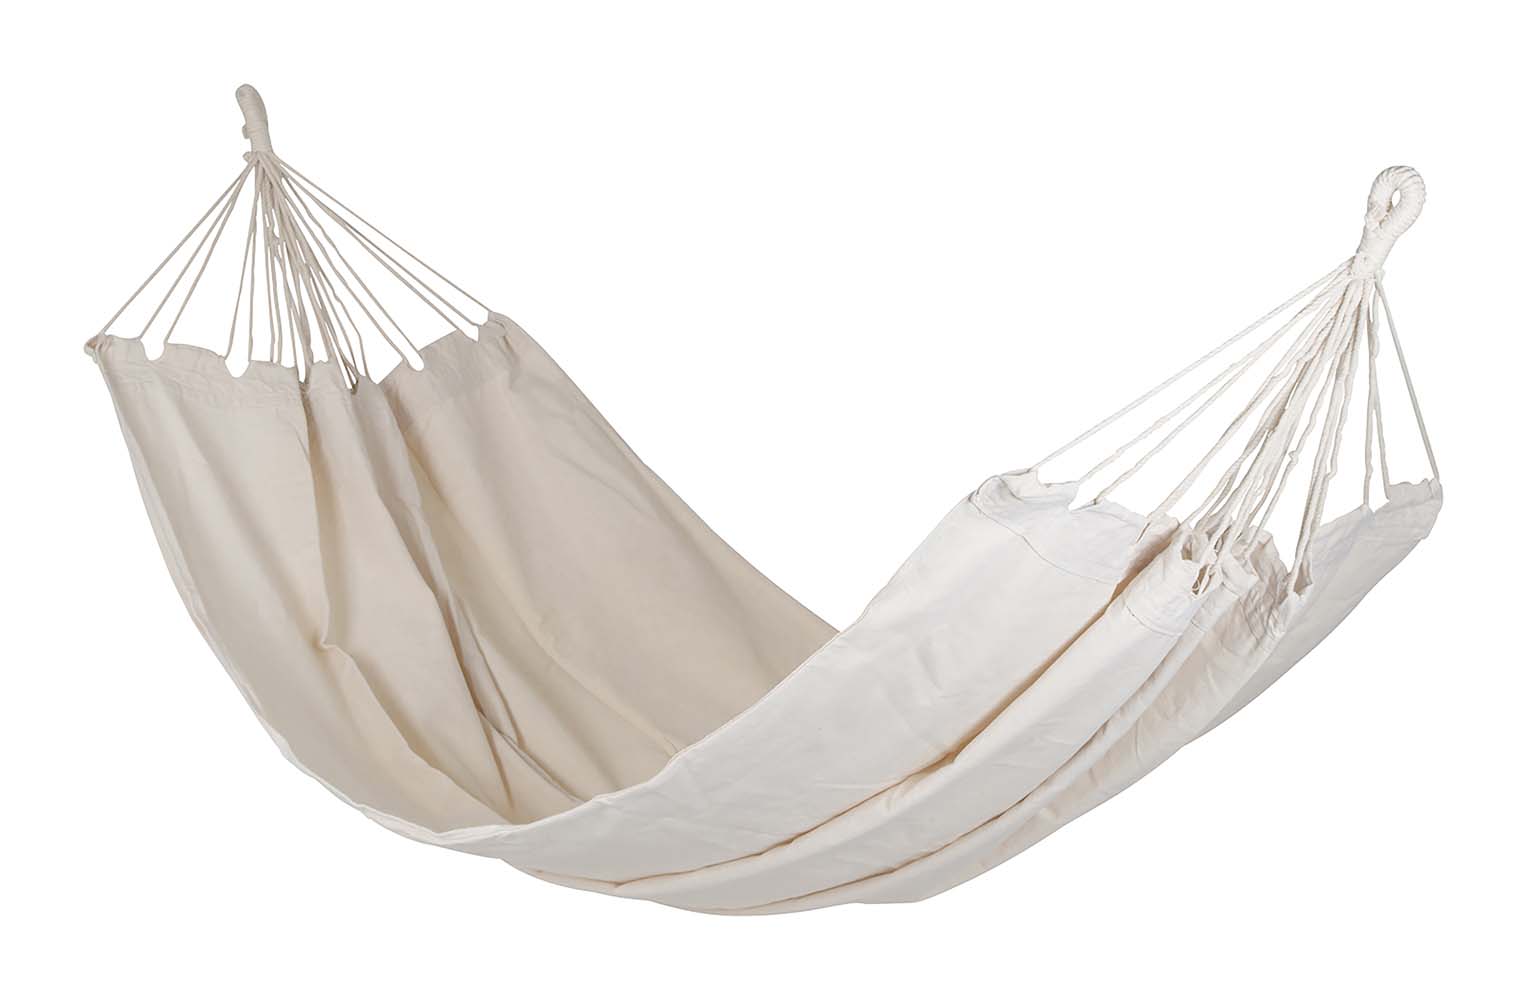 7100223 A stylish and sturdy hammock. To enjoy your holiday to the fullest! Made of sturdy 320gr/m² cotton/polyester. The hammock has no spreading stick, allowing it to adjust to the shape of your body with reduced risk of tilting - for maximum comfort. Maximum load-bearing capacity: 150 kilograms.